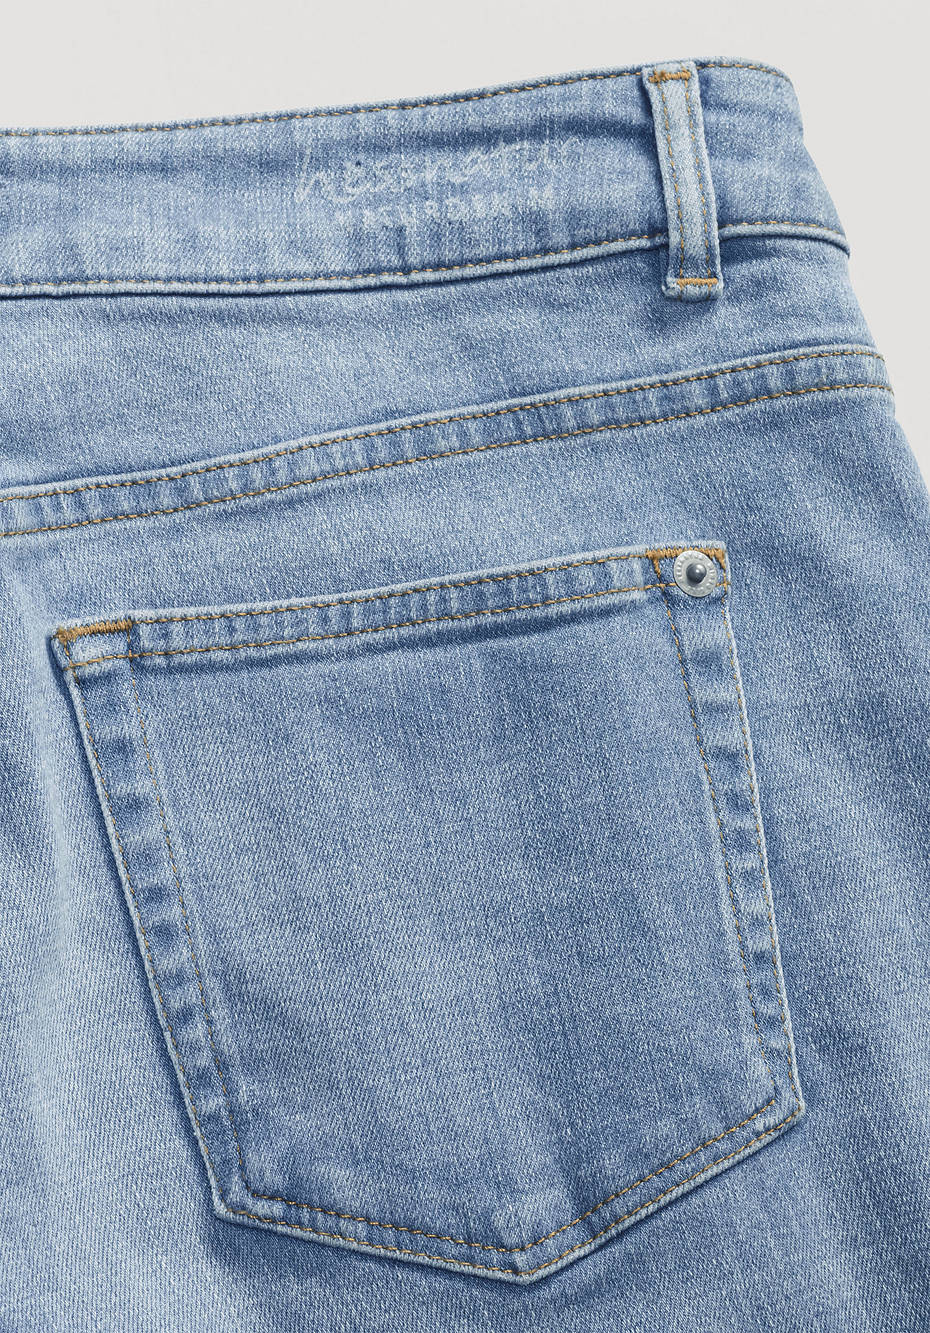 Flared jeans made from organic denim